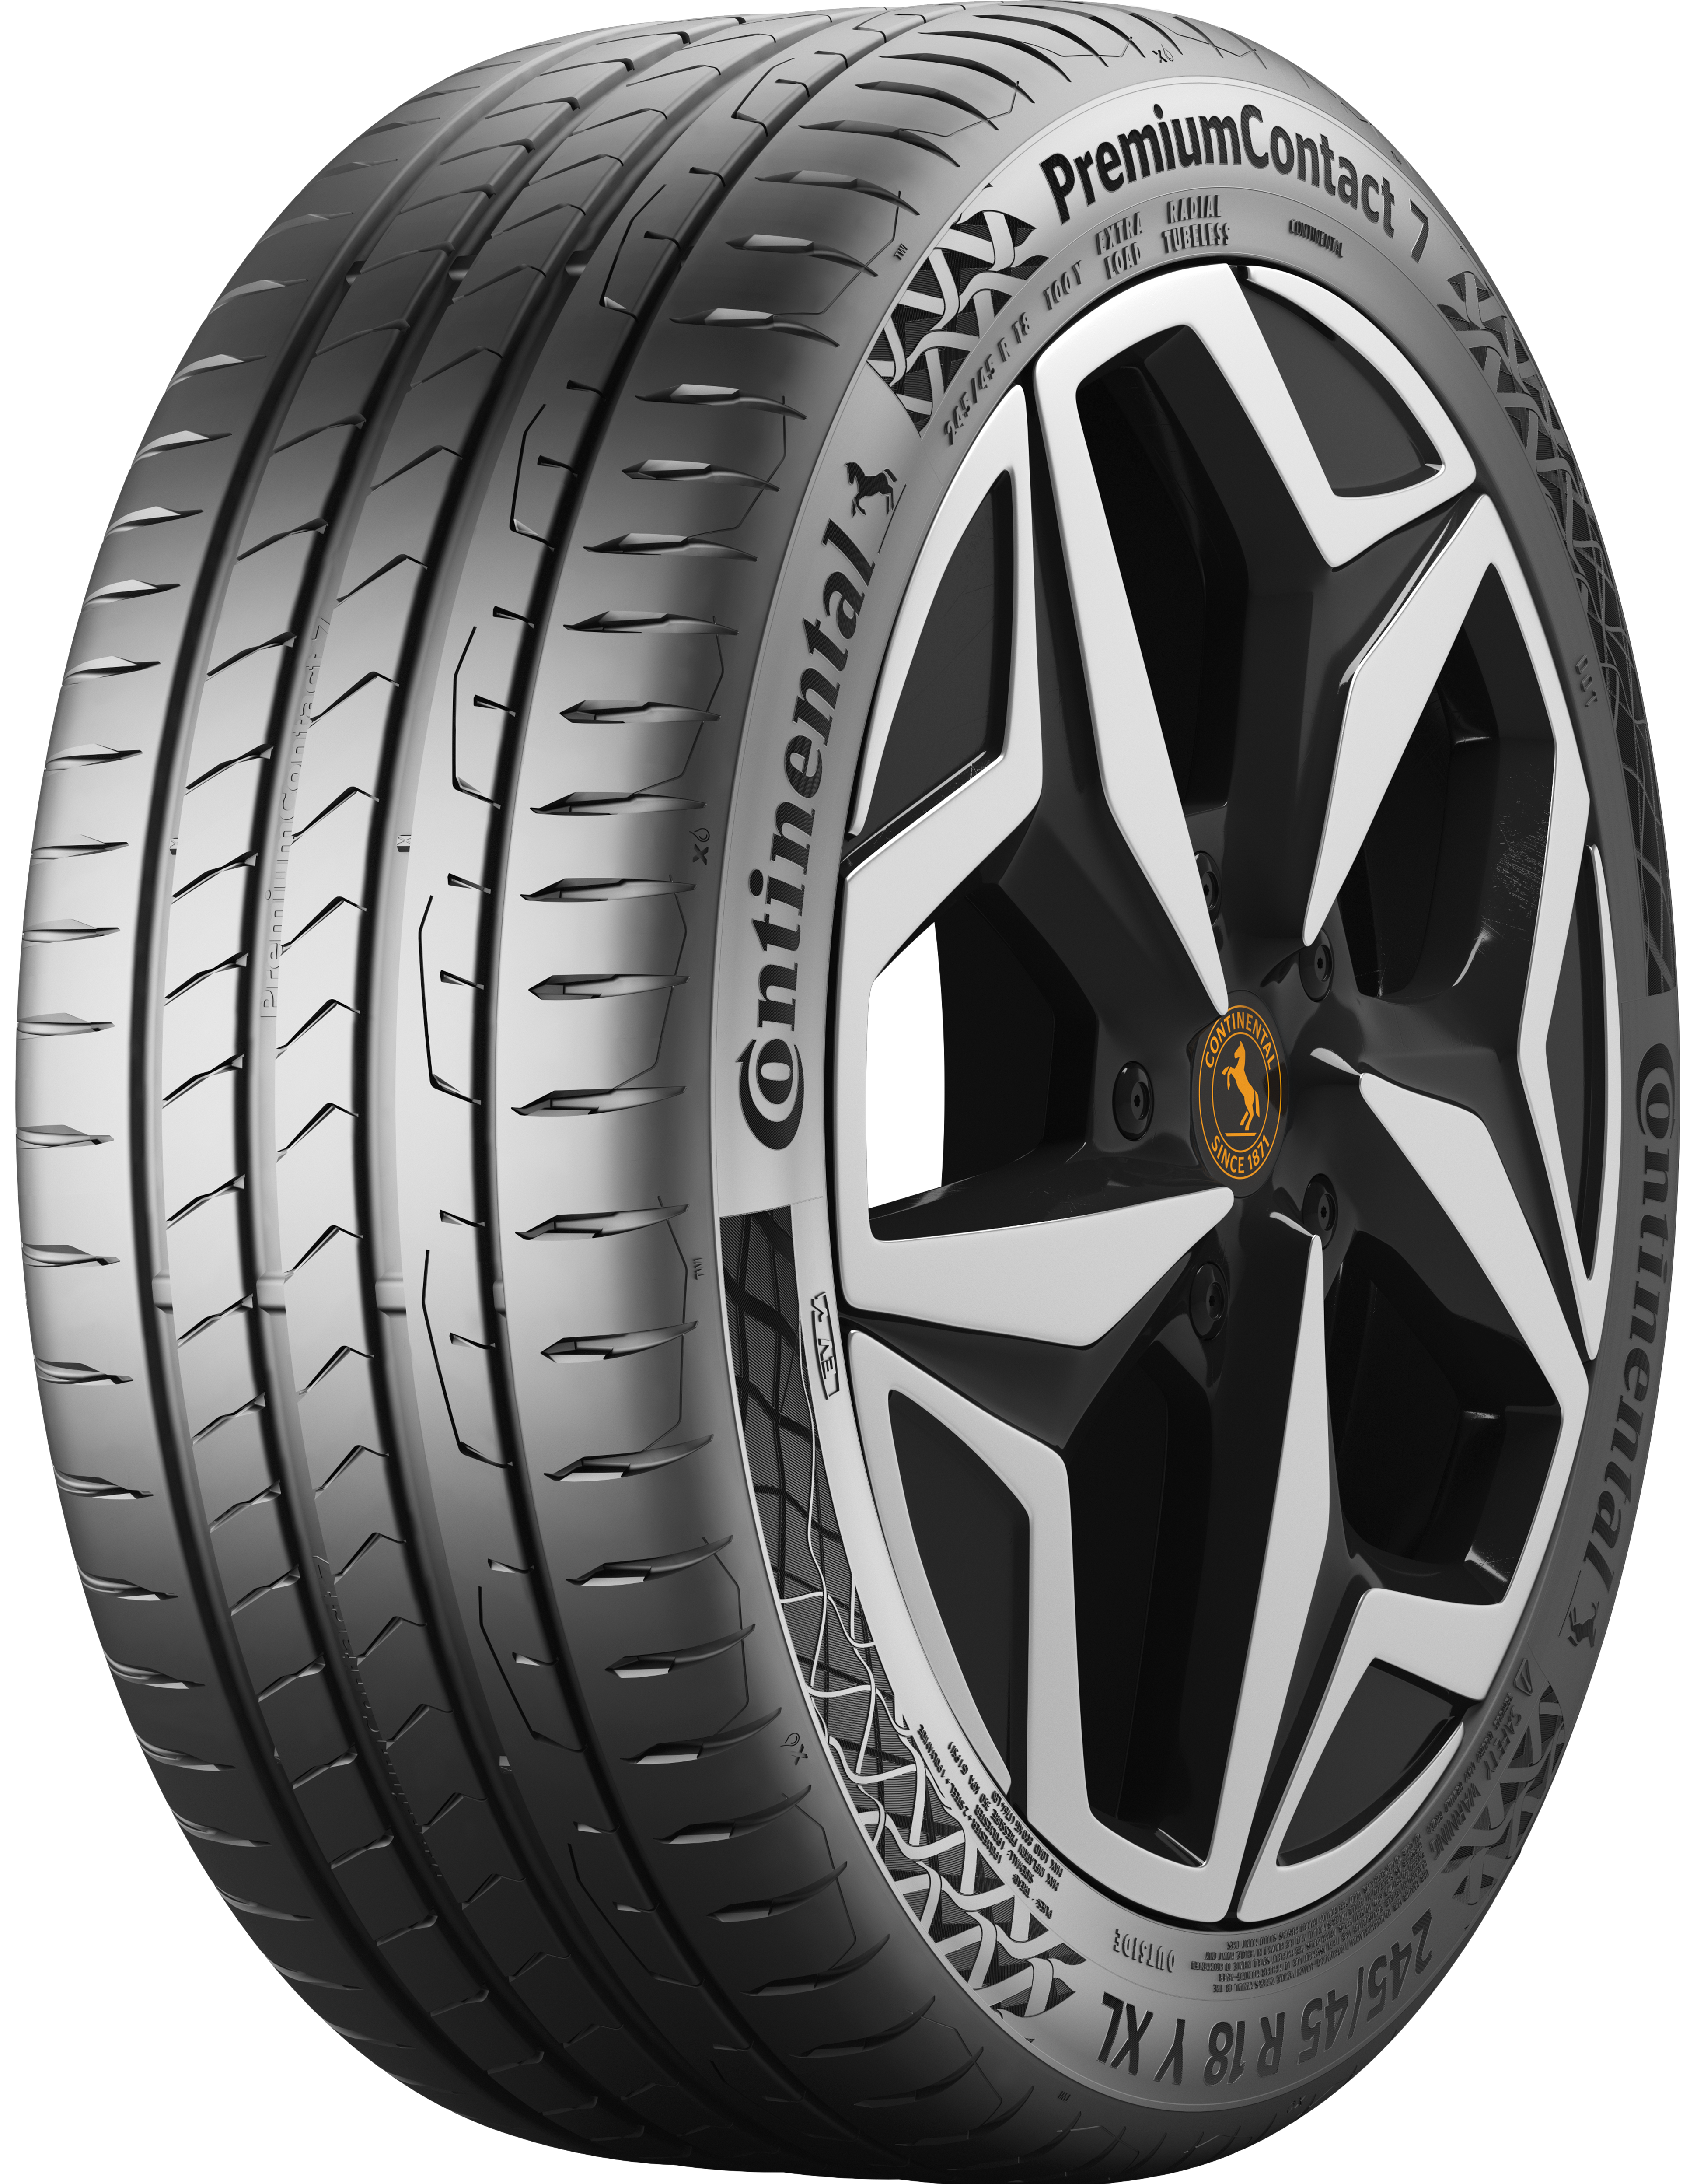 CONTINENTAL PREMIUMCONTACT 7 265/40 R 21 108T